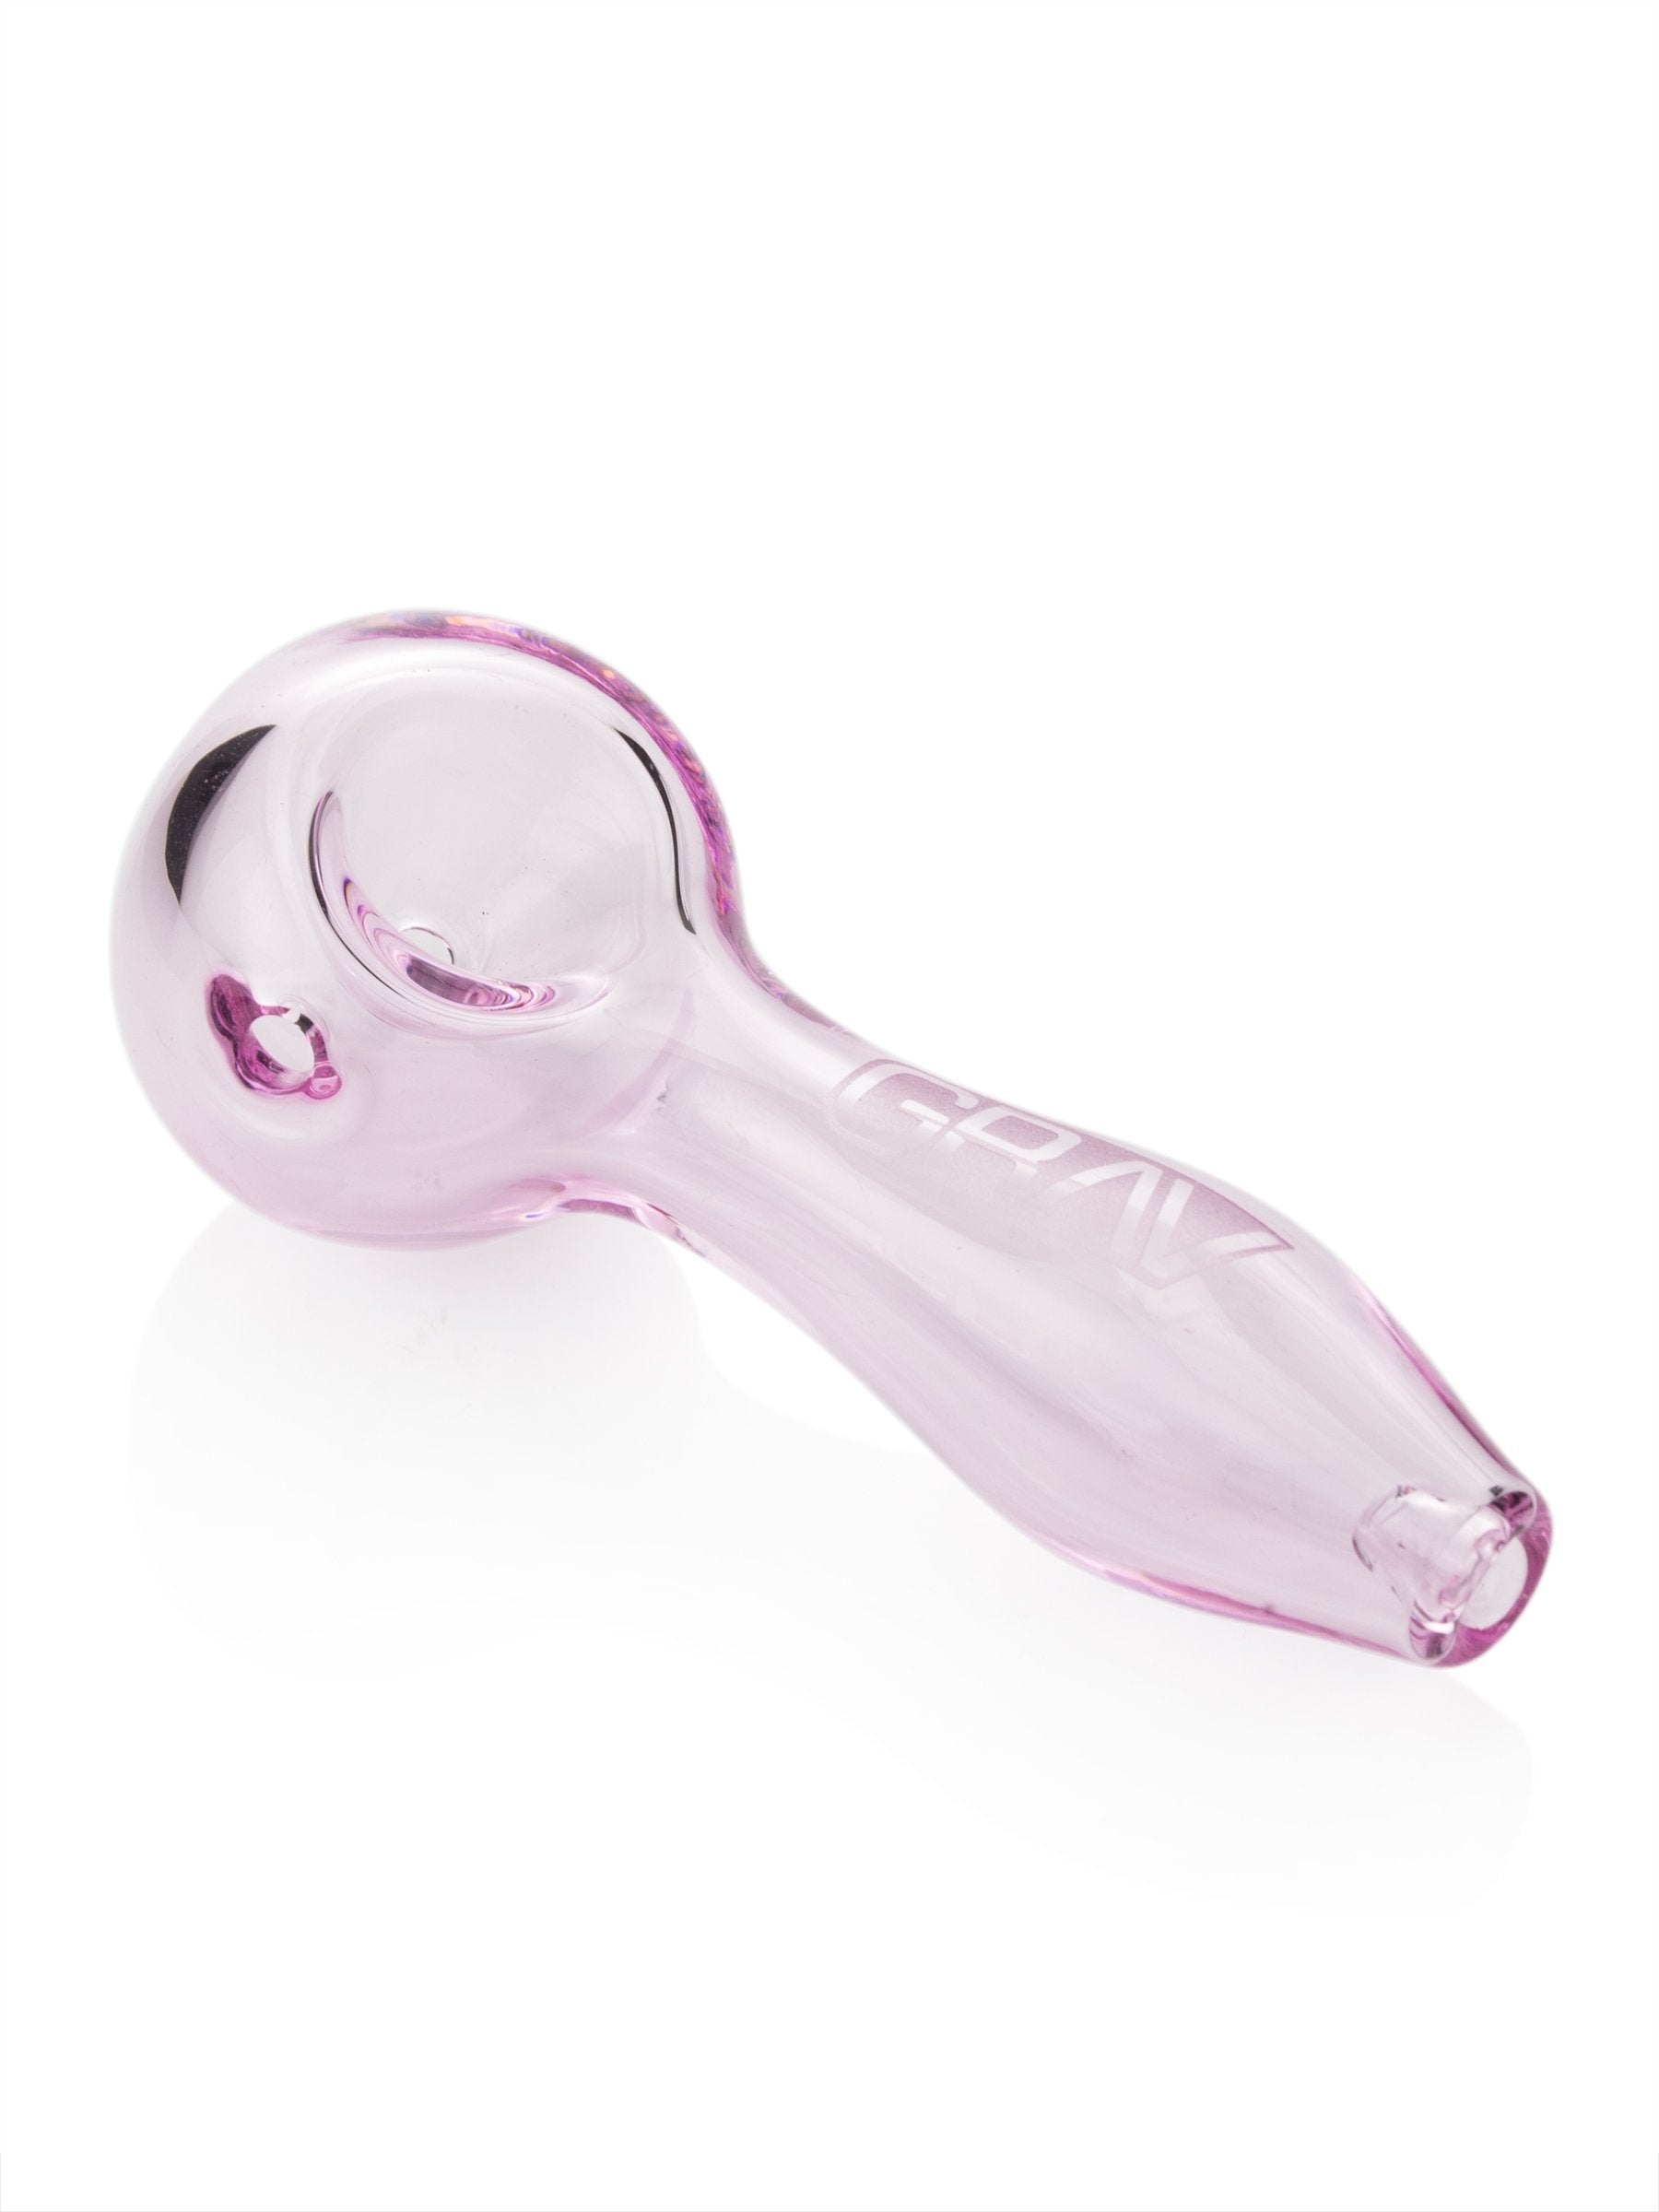 GRAV Labs Pink Hand Pipes